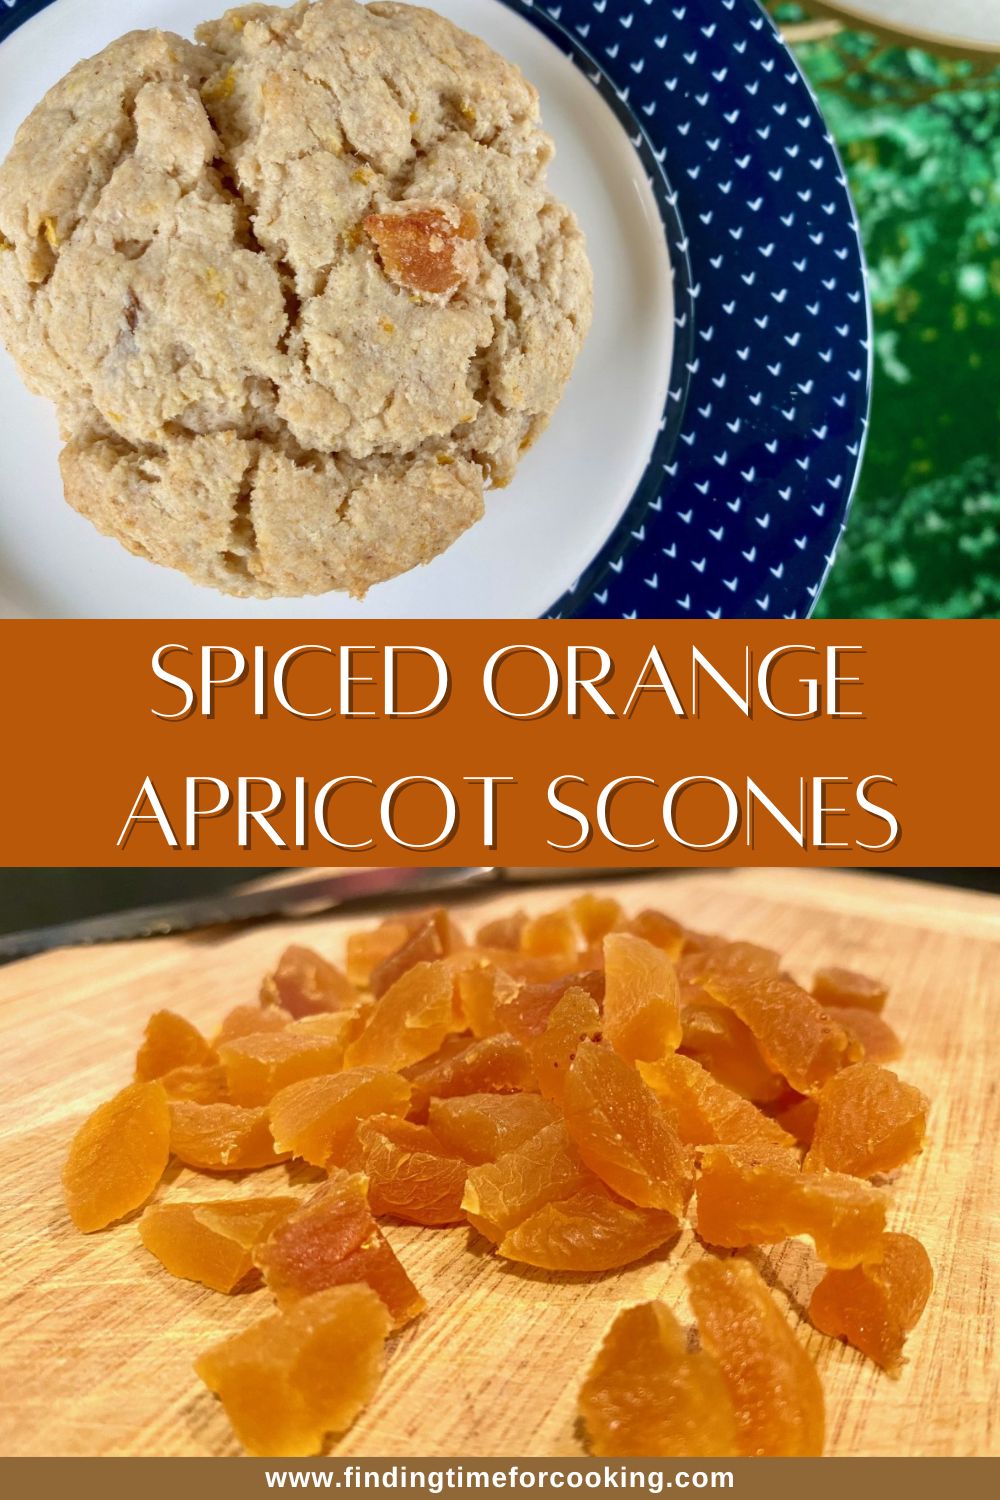 Spiced Orange Apricot Scones | These delicious easy scones are a hug in pastry form...warm spices, bright citrus notes, tart apricot, & a tender crumb make this the perfect cozy breakfast! This recipe makes 4-5 scones, but you can easily double to make a "full" batch. Scones are a great lazy brunch recipe! I give both regular and gluten-free scone recipe options here. #scones #breakfastrecipe #brunch #gf